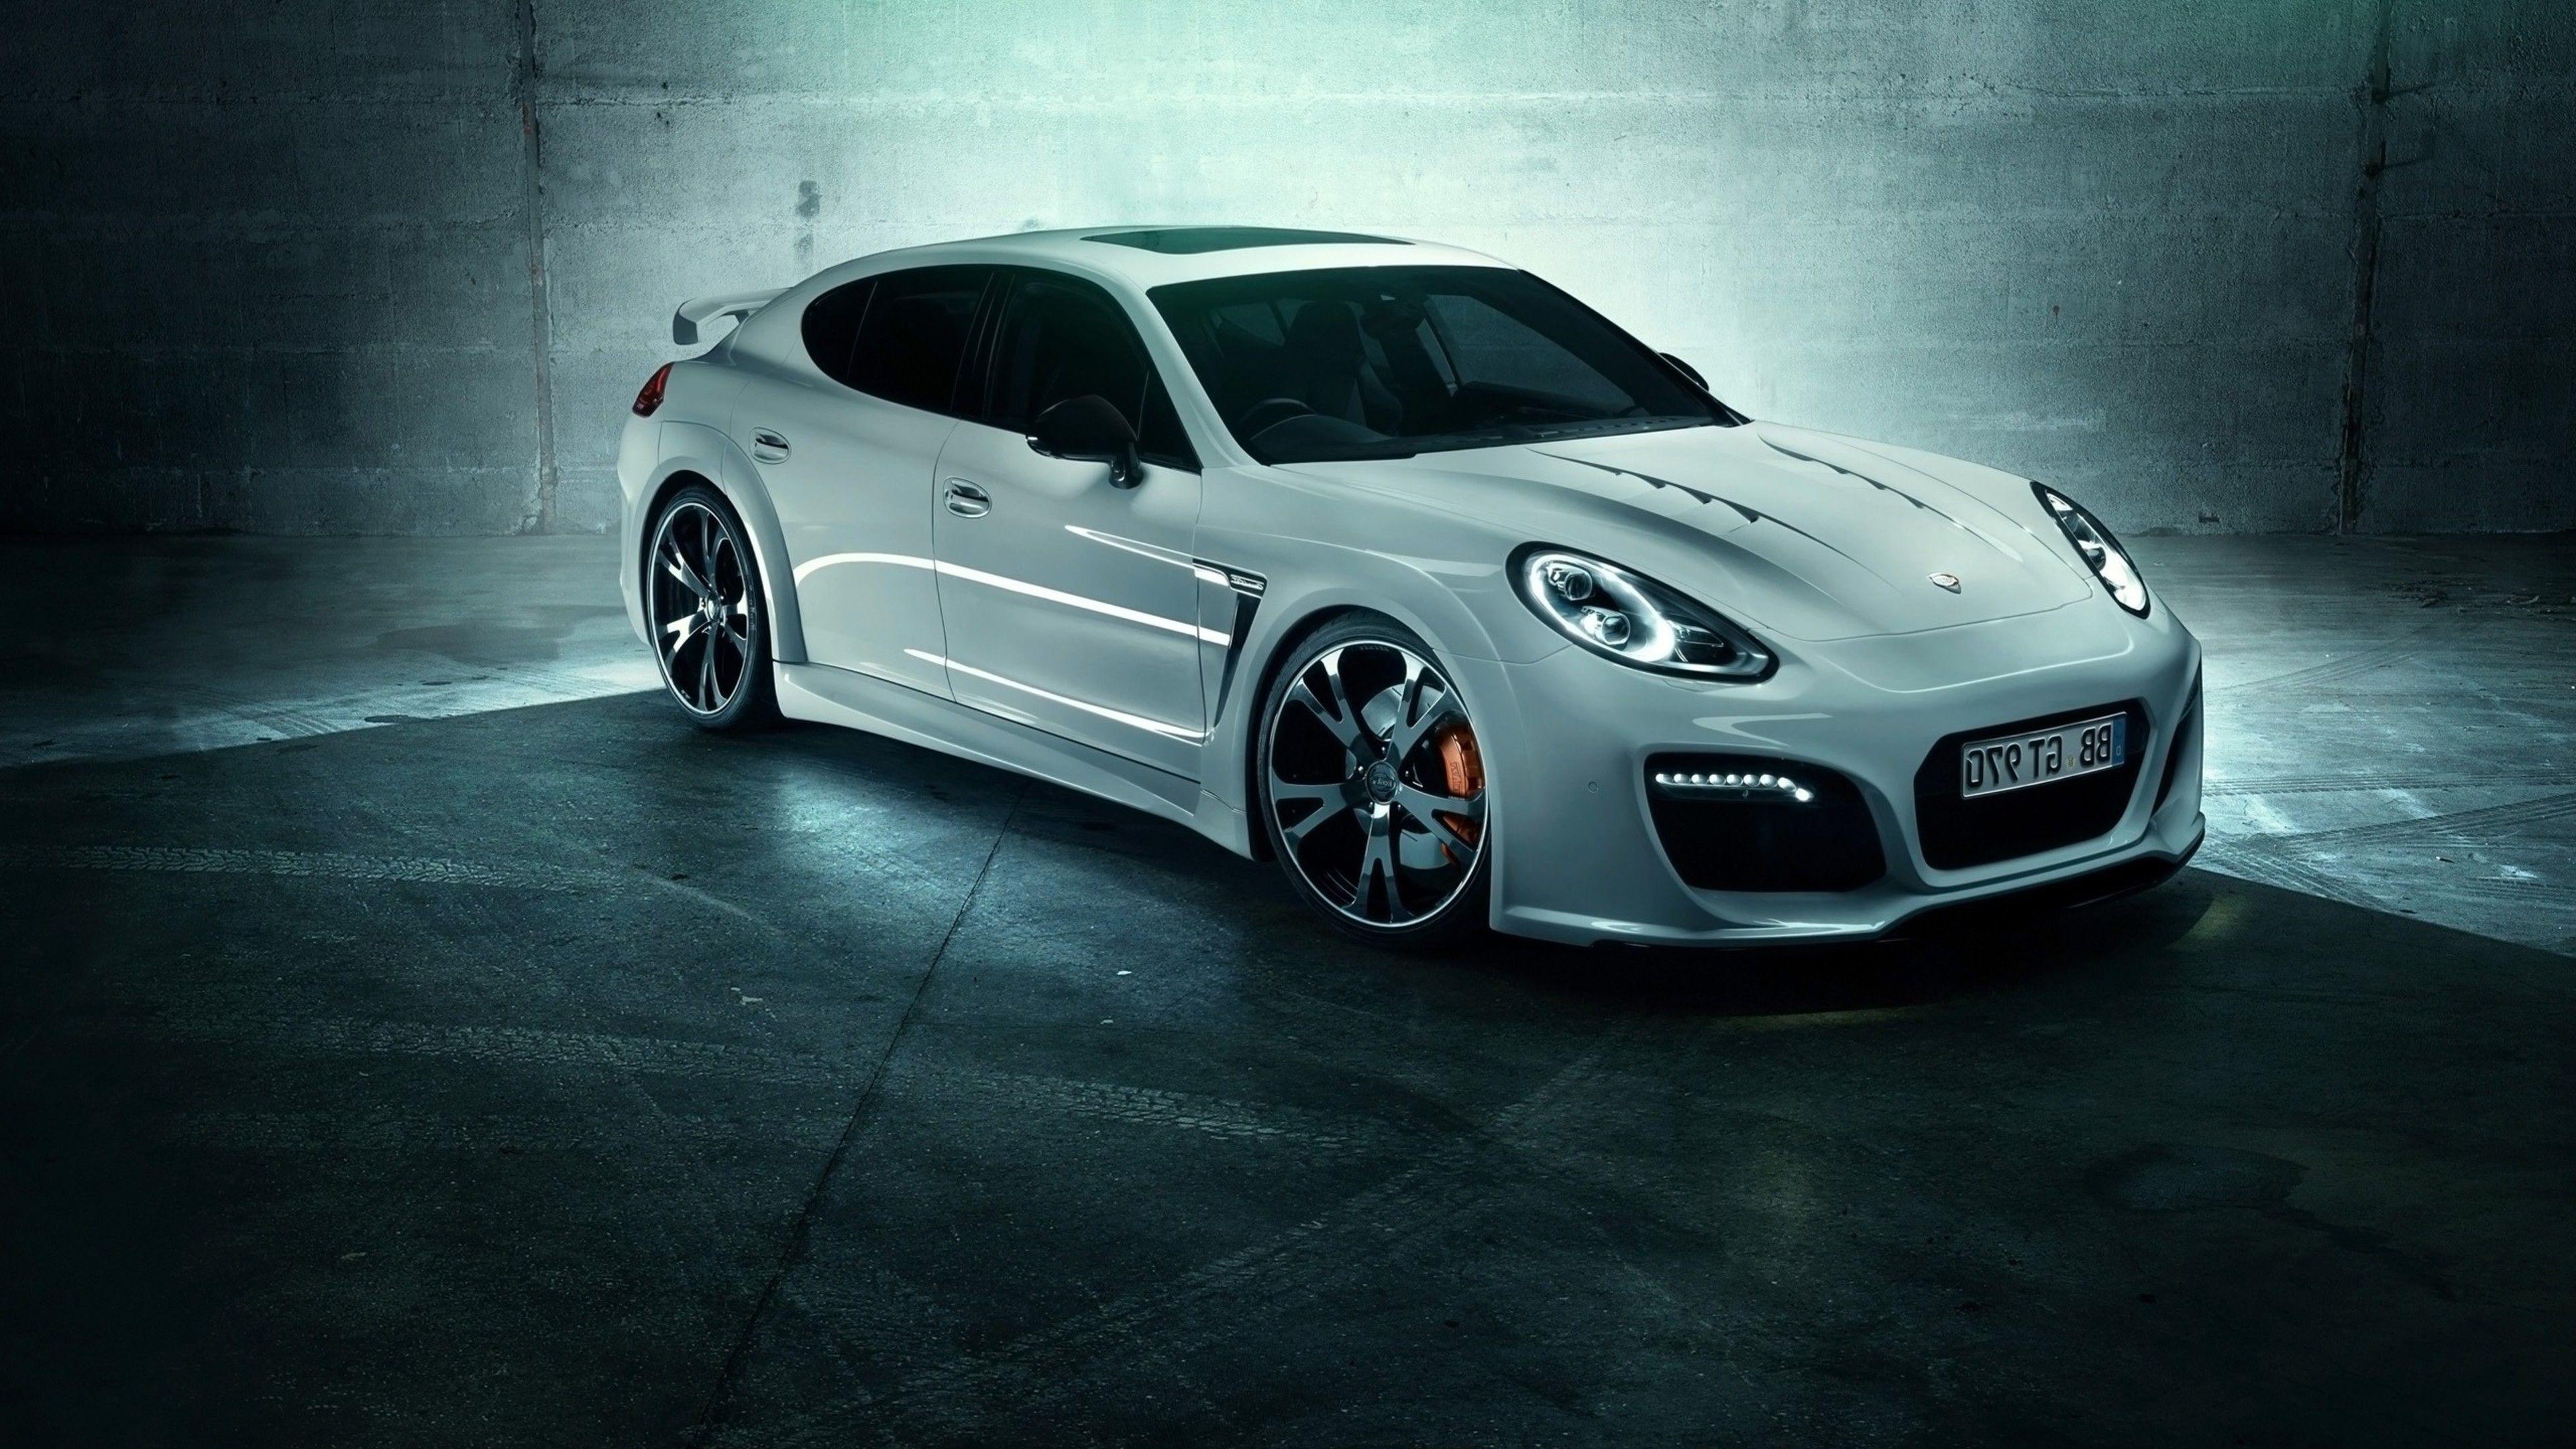 Porsche Panamera Turbo, HD Cars, 4k Wallpapers, Image, Backgrounds